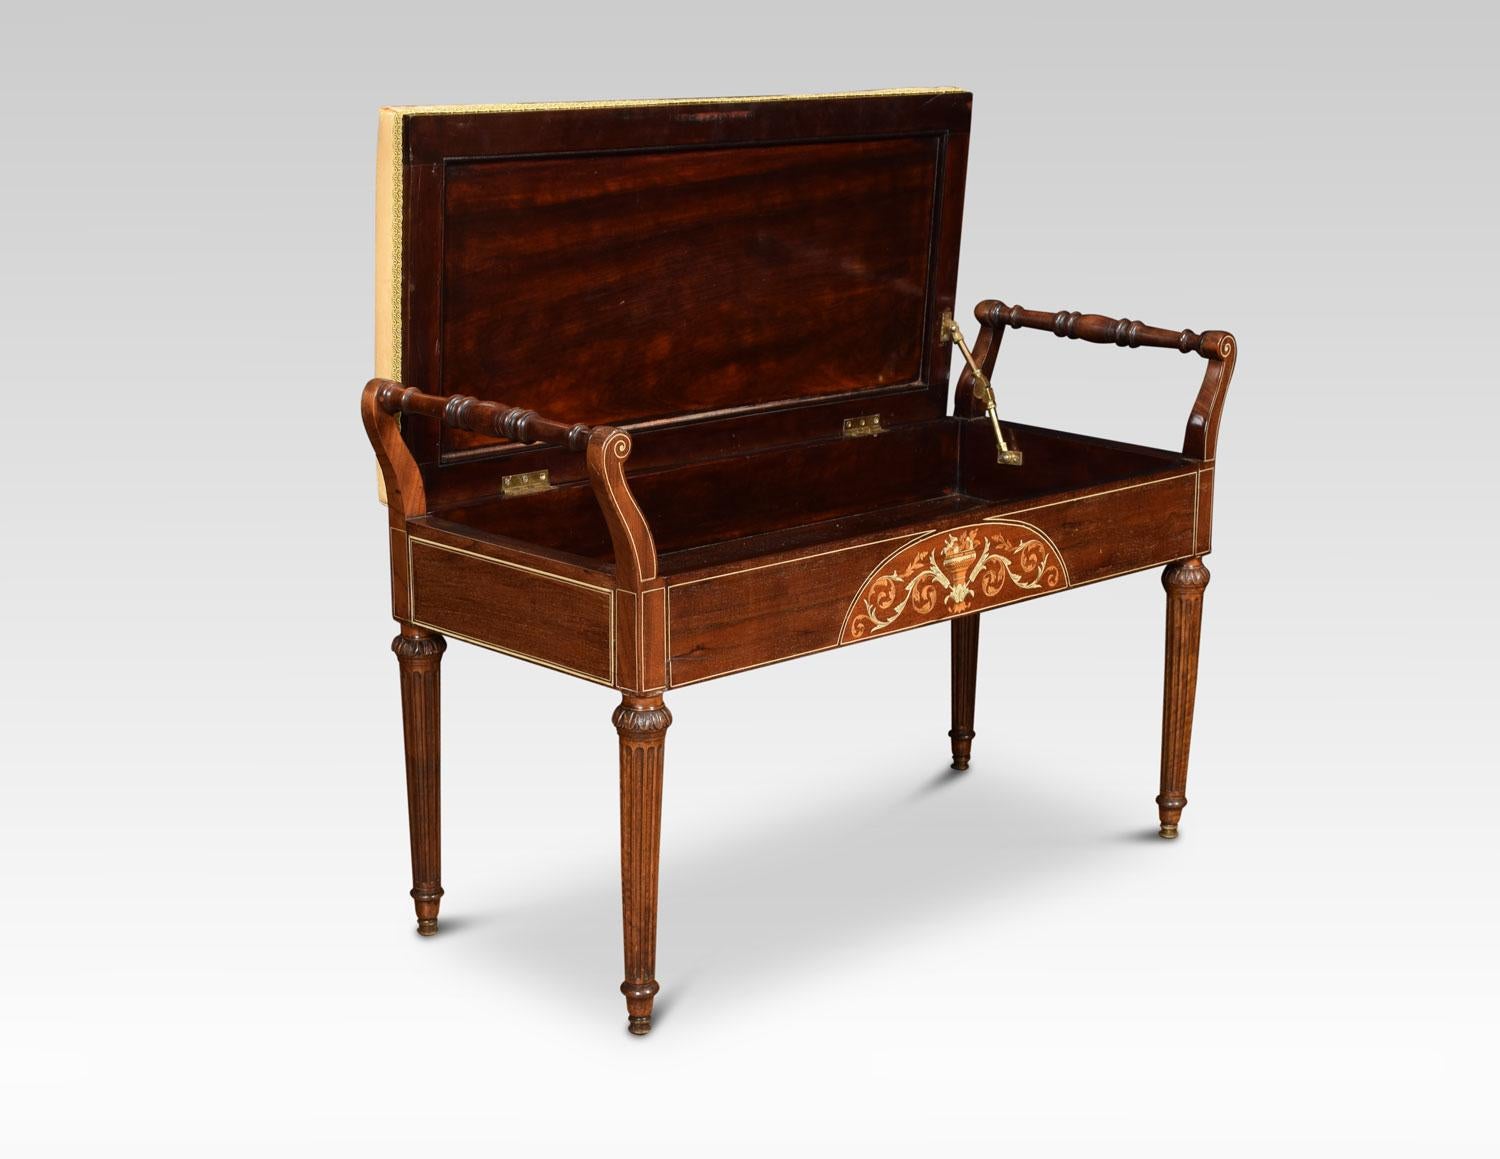 Mahogany inlaid duet stool, the rectangular damask upholstered seat opening to reveal large storage area, flanked by turned scrolling handles. To the freeze finely decorated in inlay, all raised up on four turned tapering legs.
Dimensions:
Height